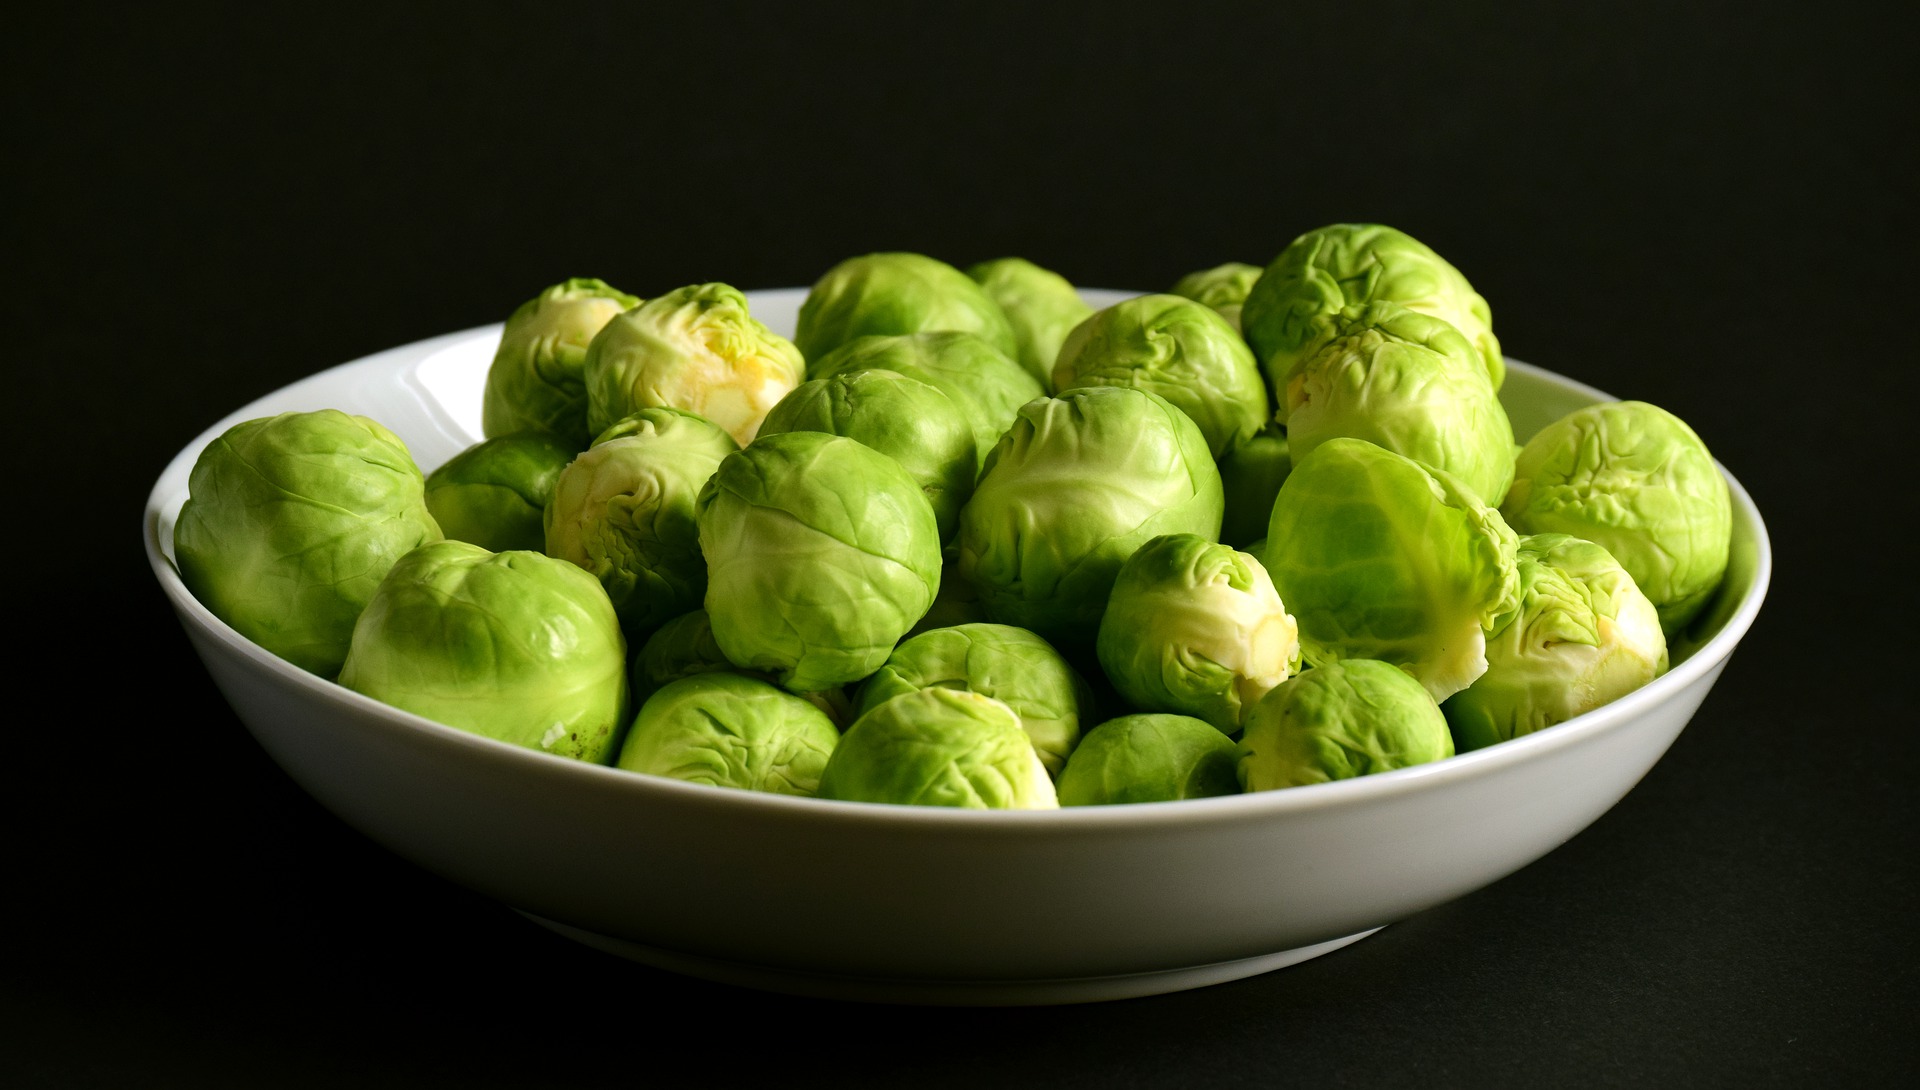 brussels-sprouts-3100702_1920 (2)